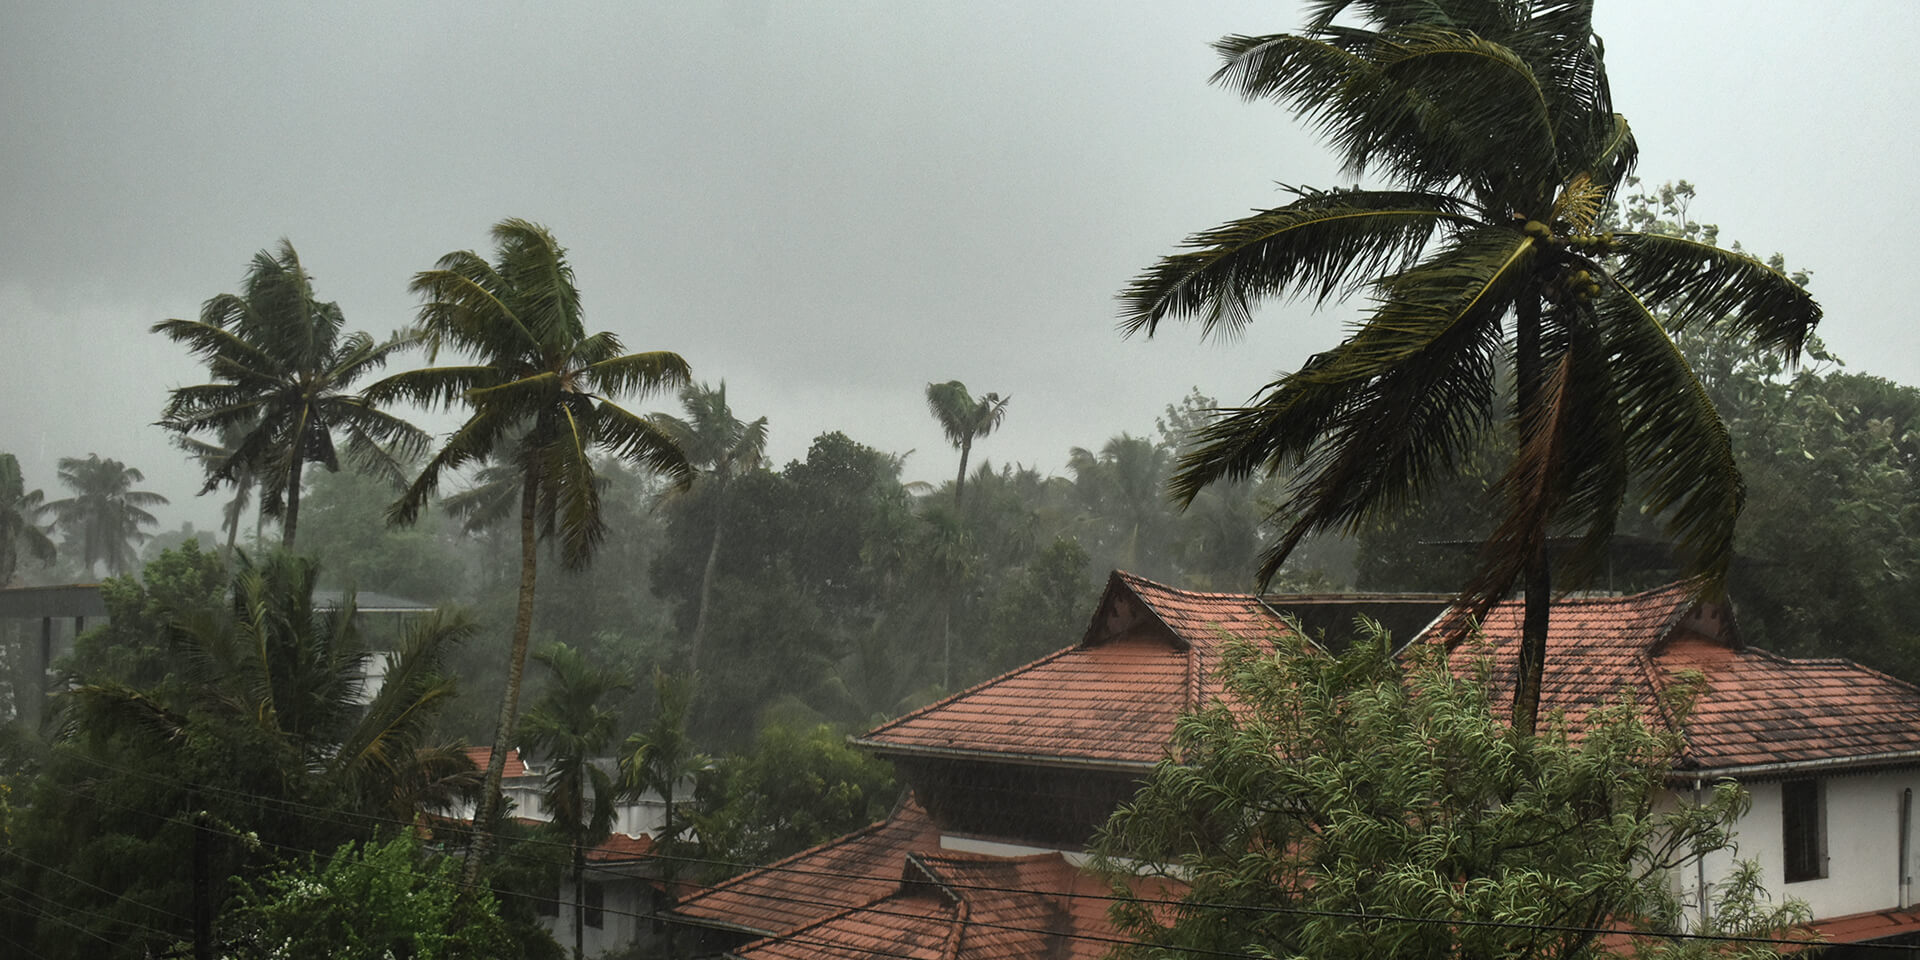 Heavy rainfall on palm trees and houses